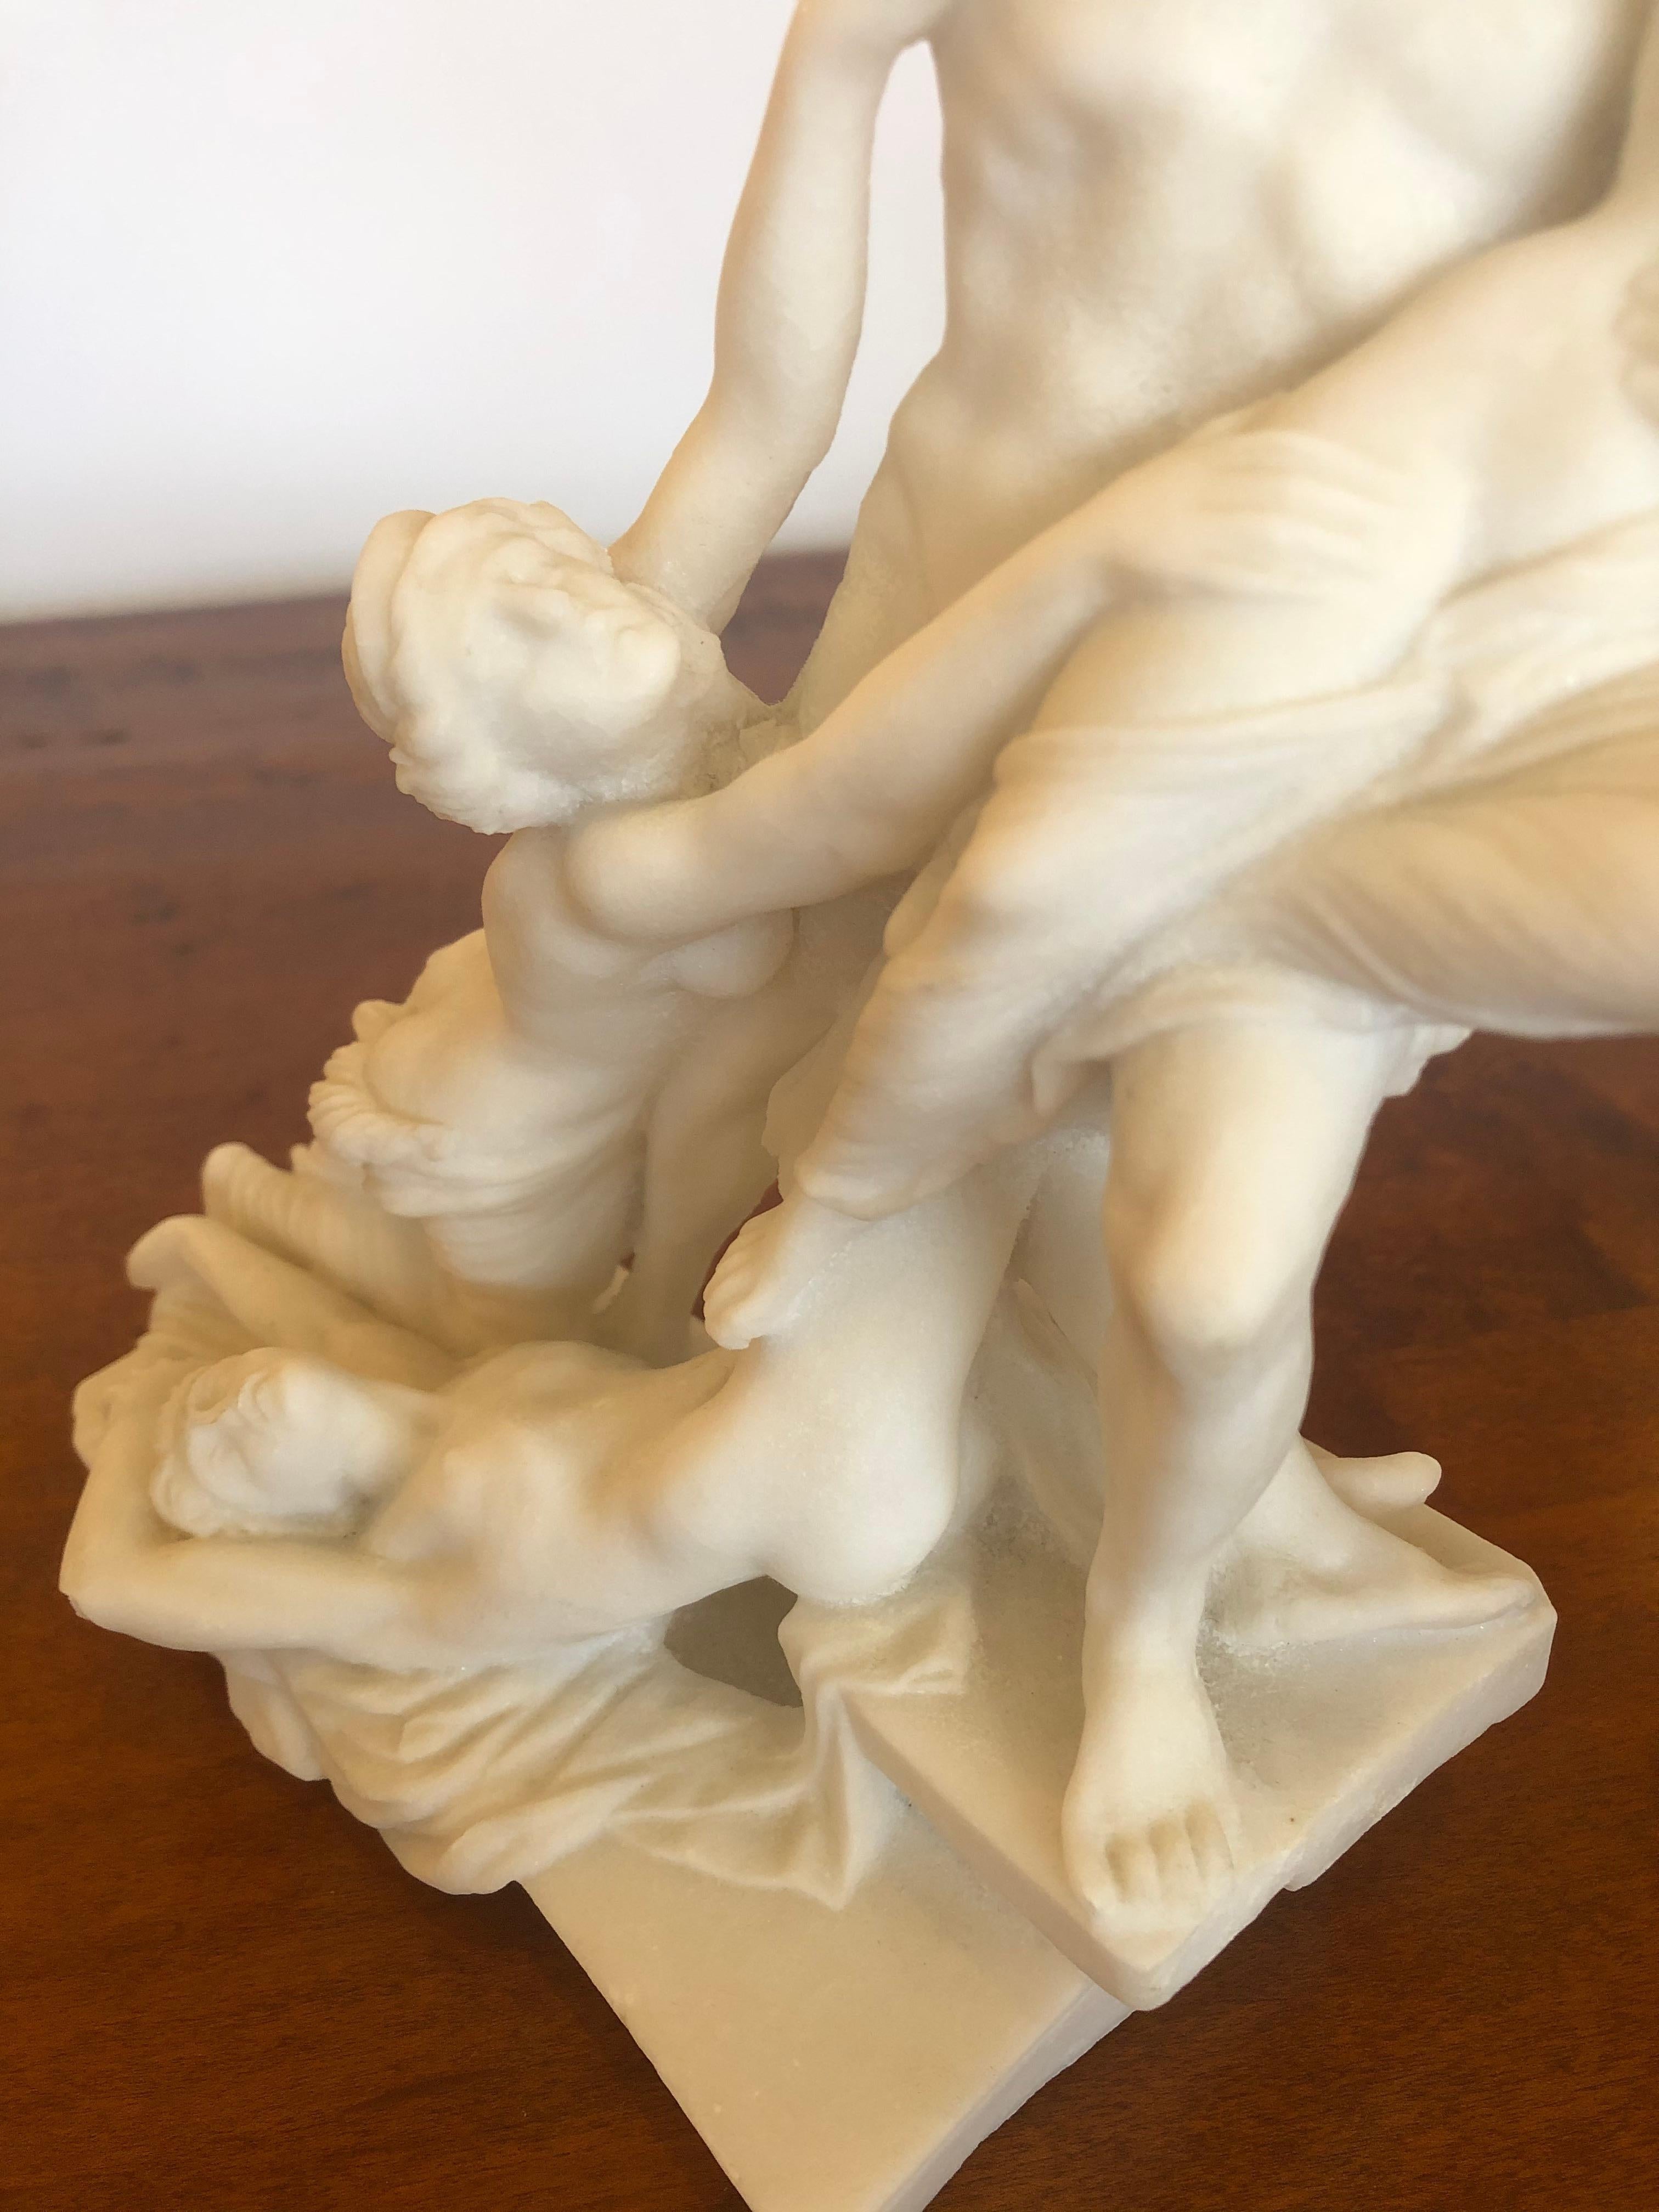 Mid-20th Century Antique Parian Porcelain Sculpture of Intertwined Mythological Figures For Sale